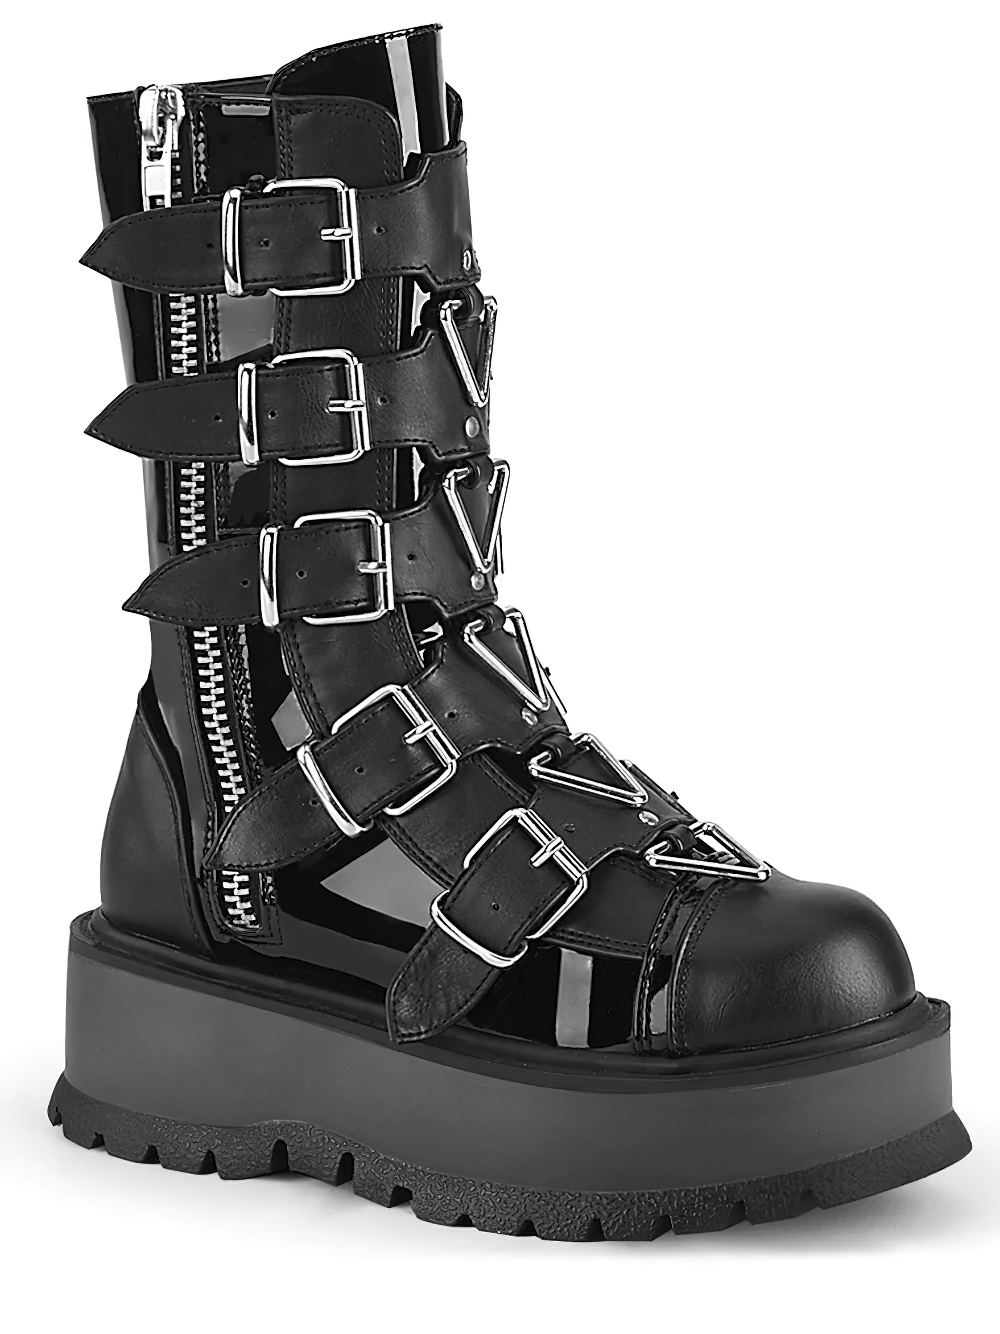 DEMONIA Buckled Triangle Rings Mid-Calf Boots